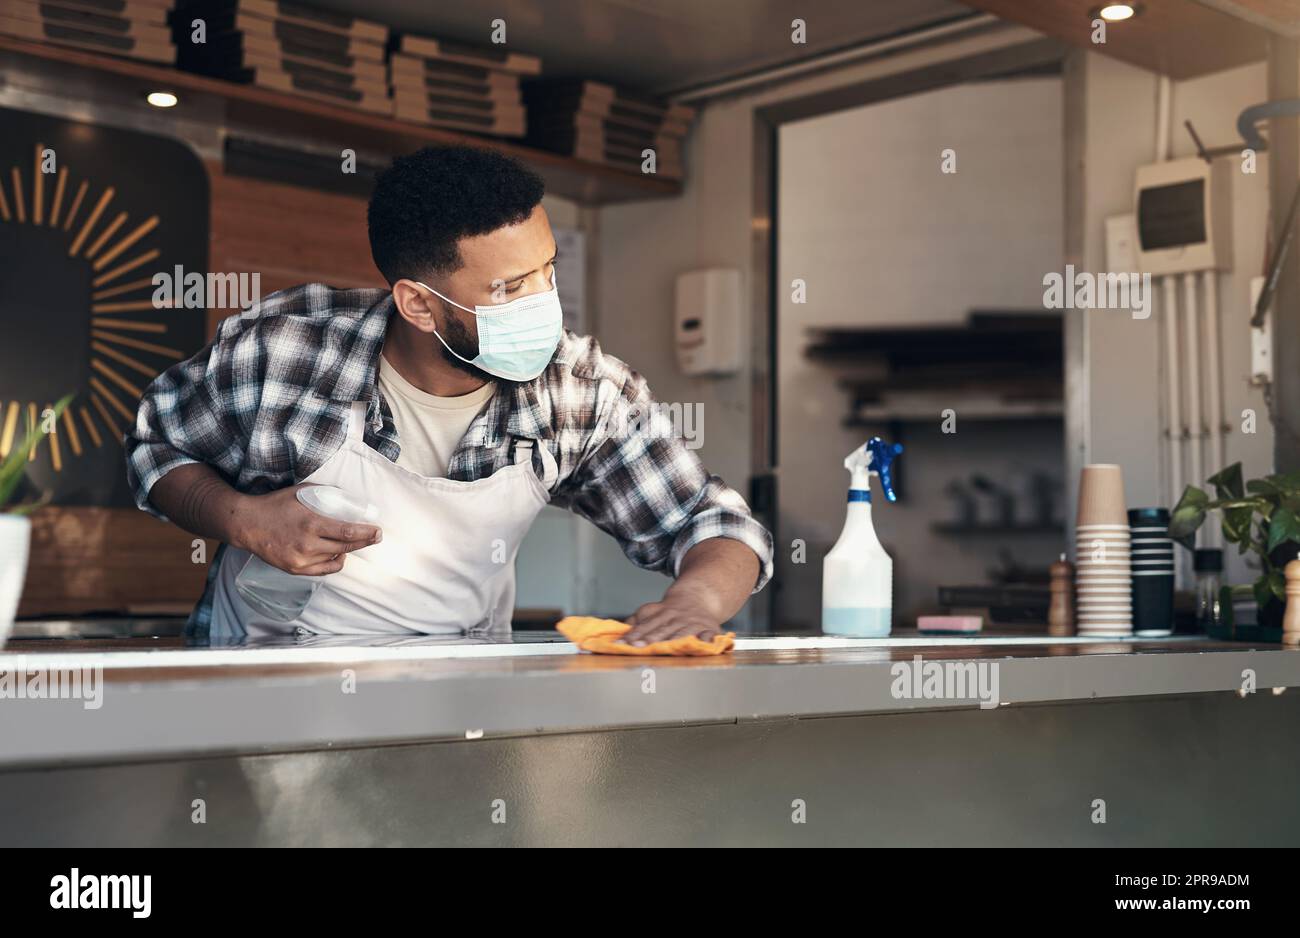 Covid germs are not allowed in my cafe. a young man standing alone and sanitising the counter tops in his restaurant while wearing a face mask. Stock Photo